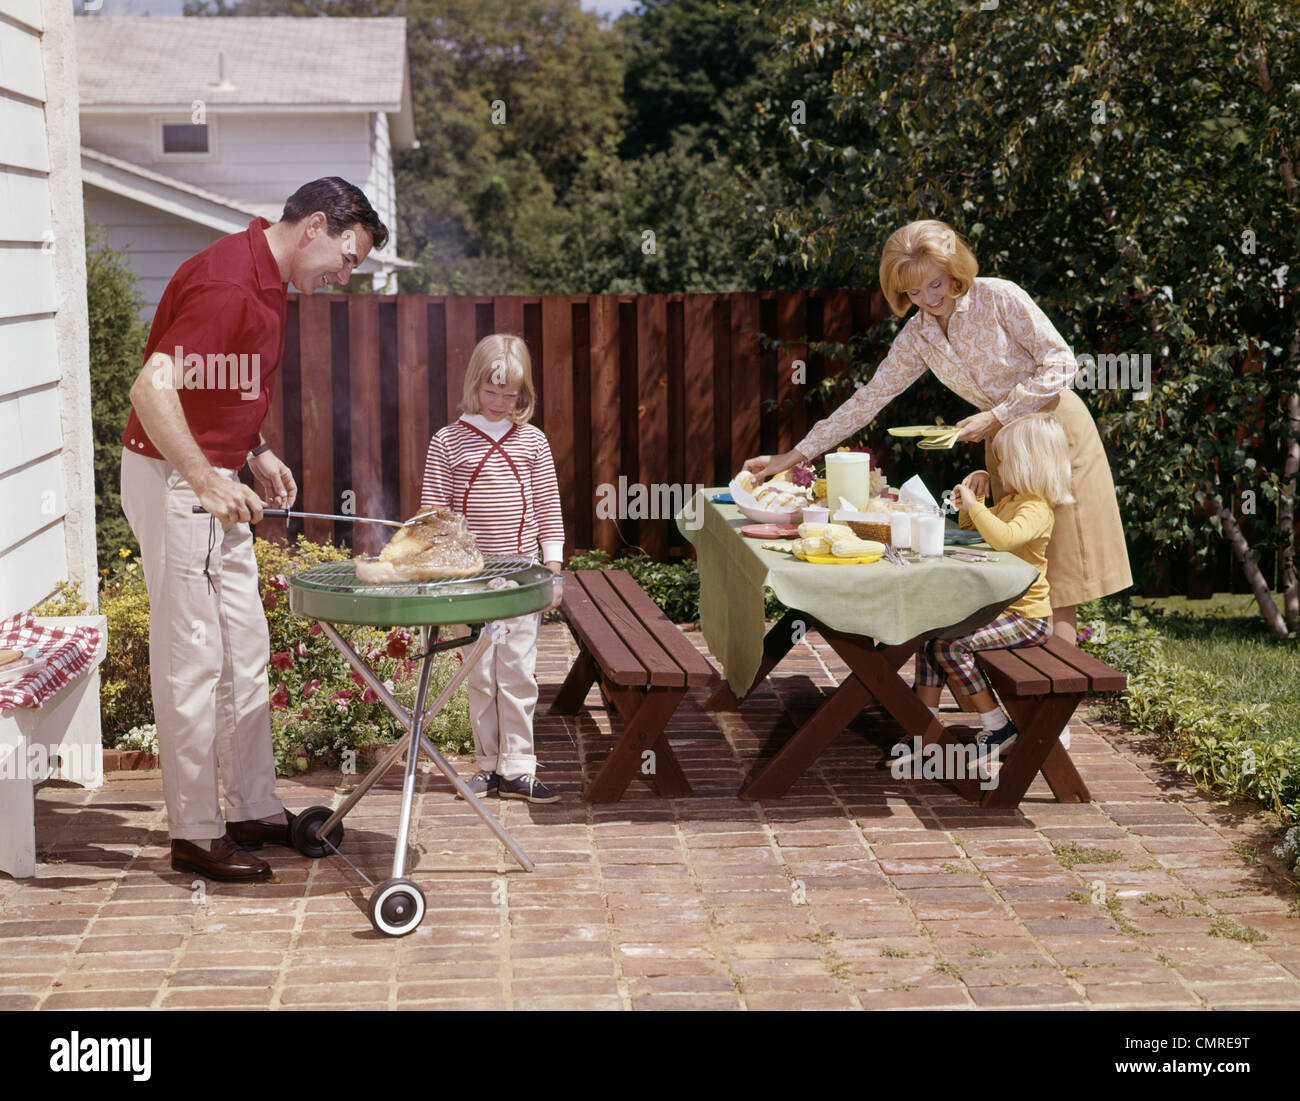 1960s FAMILY FATHER MOTHER TWO DAUGHTERS BARBEQUE IN BACKYARD ON BRICK PATIO Stock Photo